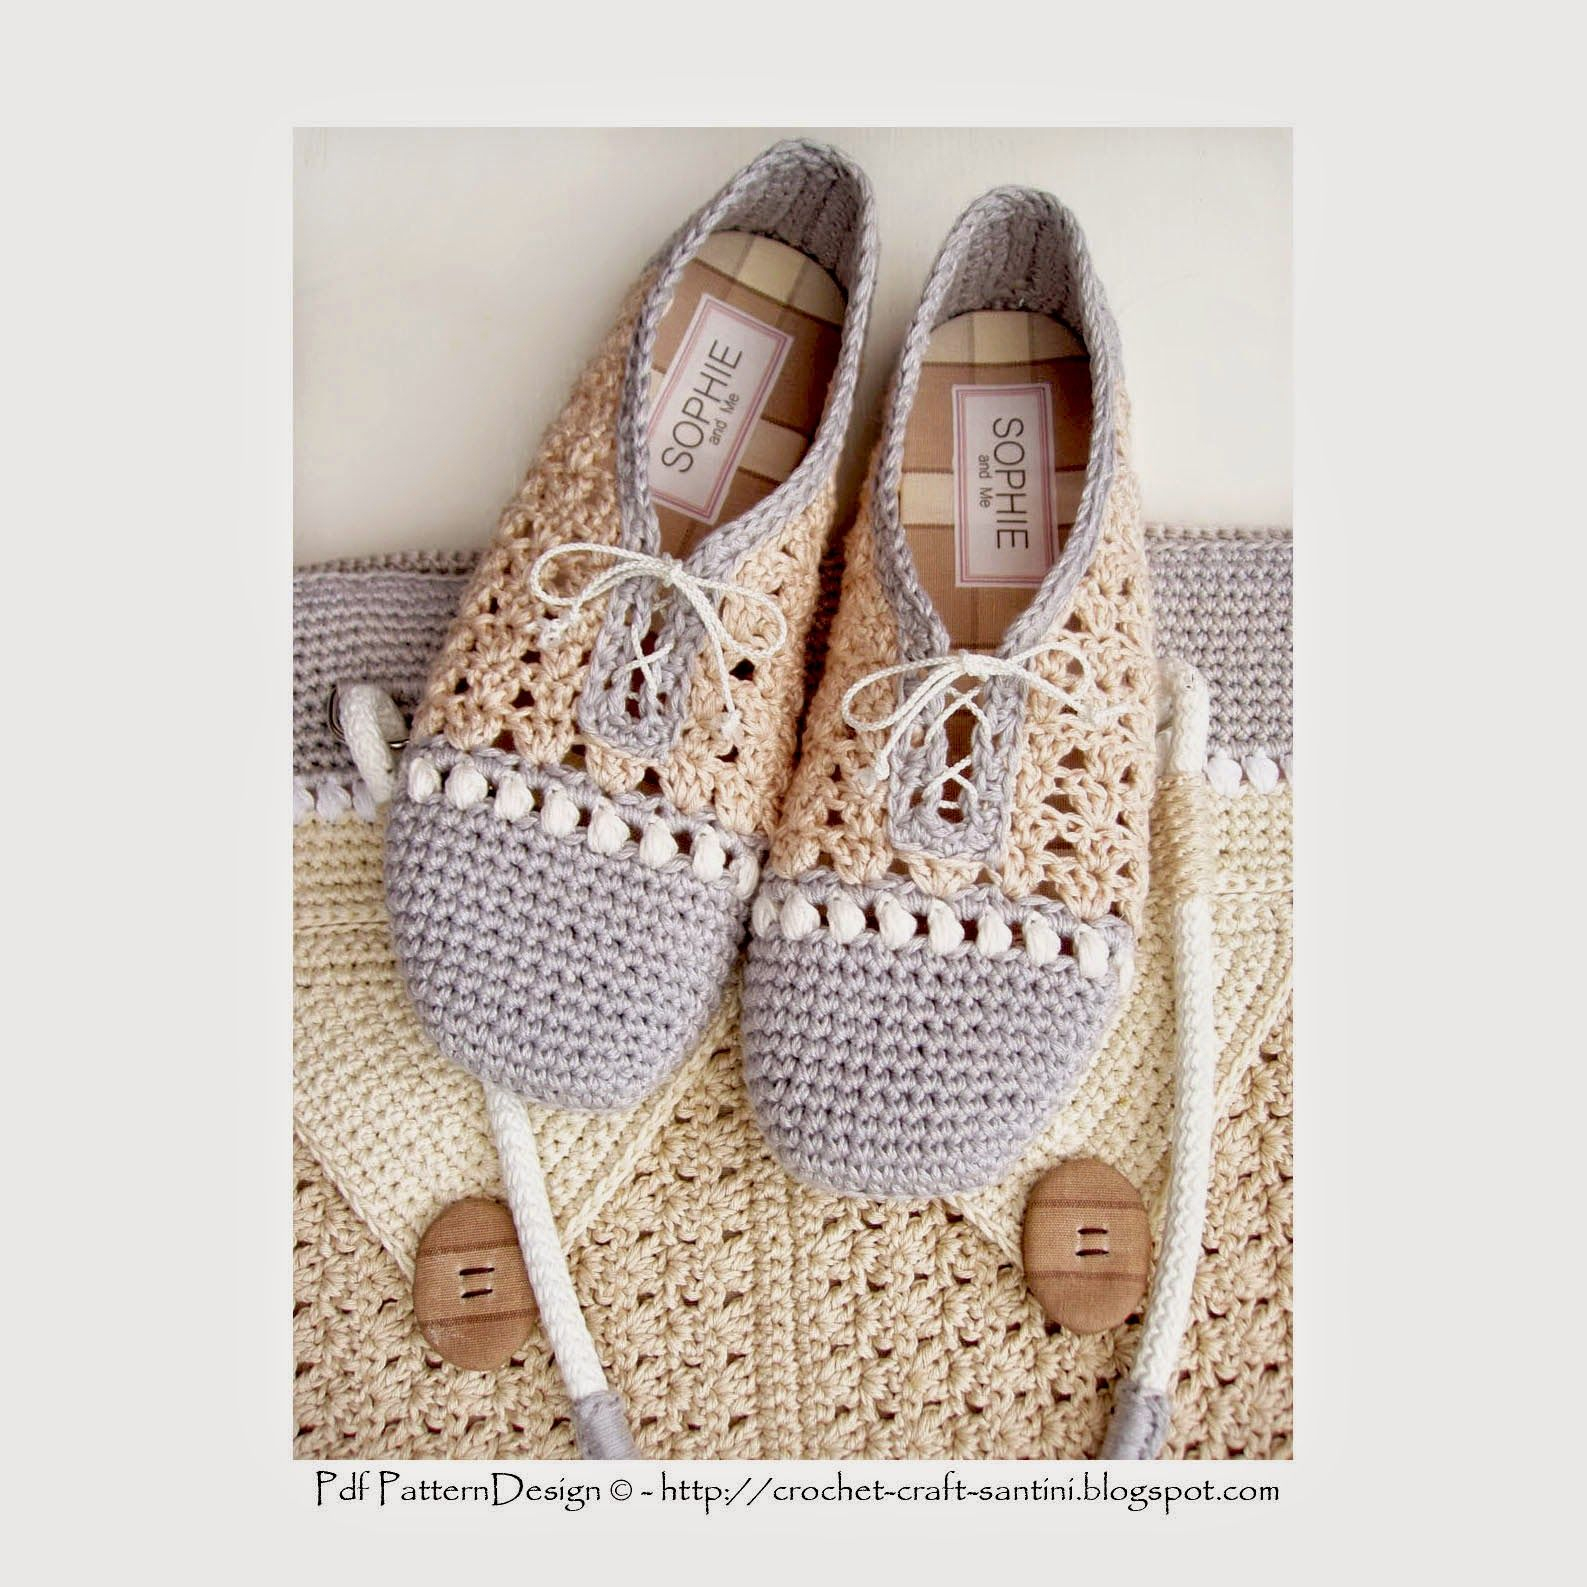 Crochet Shoe Pattern Sophie And Me Crochet Slippershoes With Matching Shopping Bag New